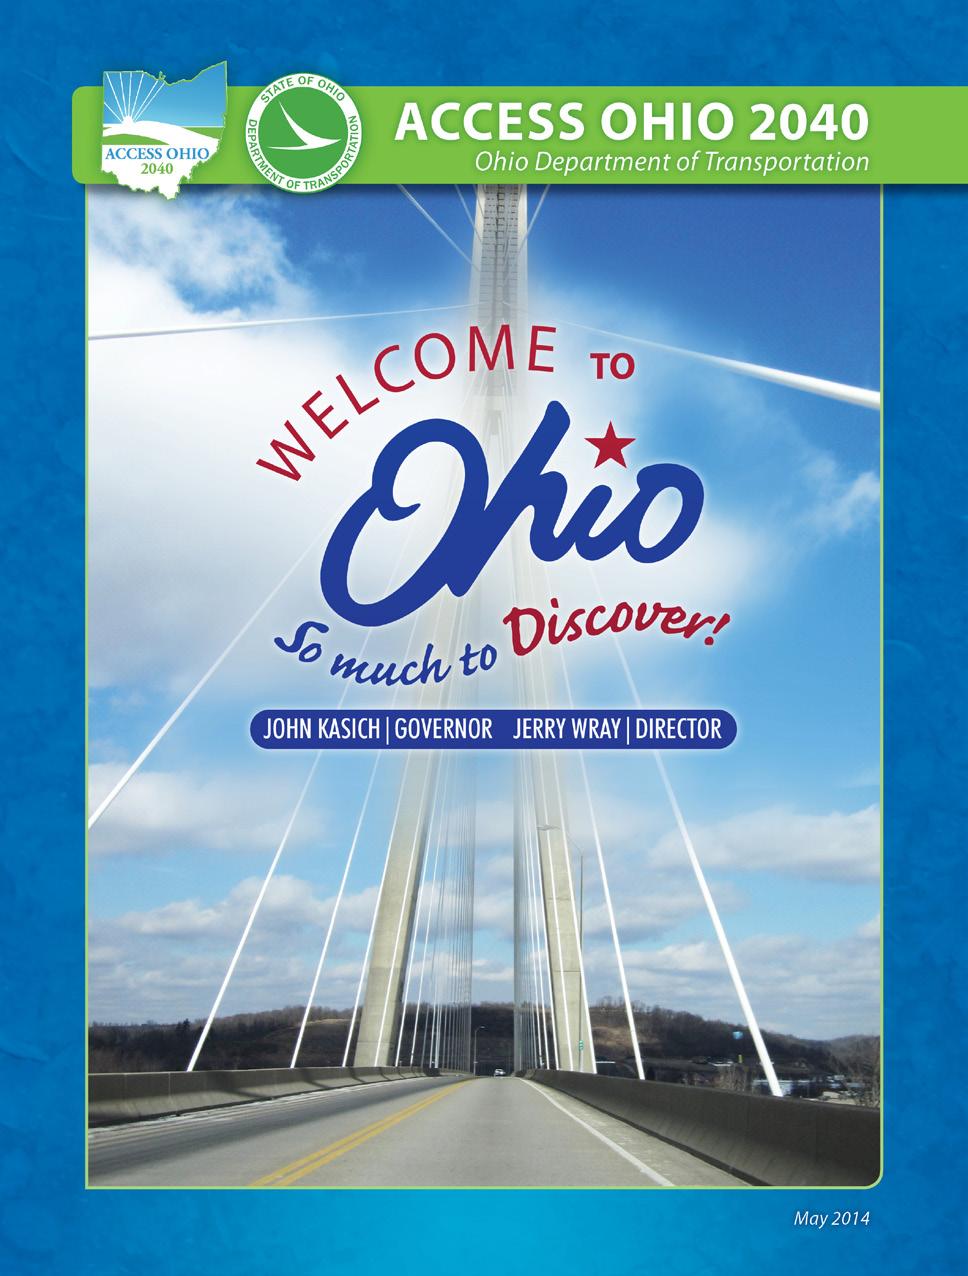 3.0 LOCAL ELECTED OFFICIAL PARTICIPATION OPPORTUNITIES In addition to coordinating with local elected officials through the RTPO planning processes, ODOT provides numerous opportunities for